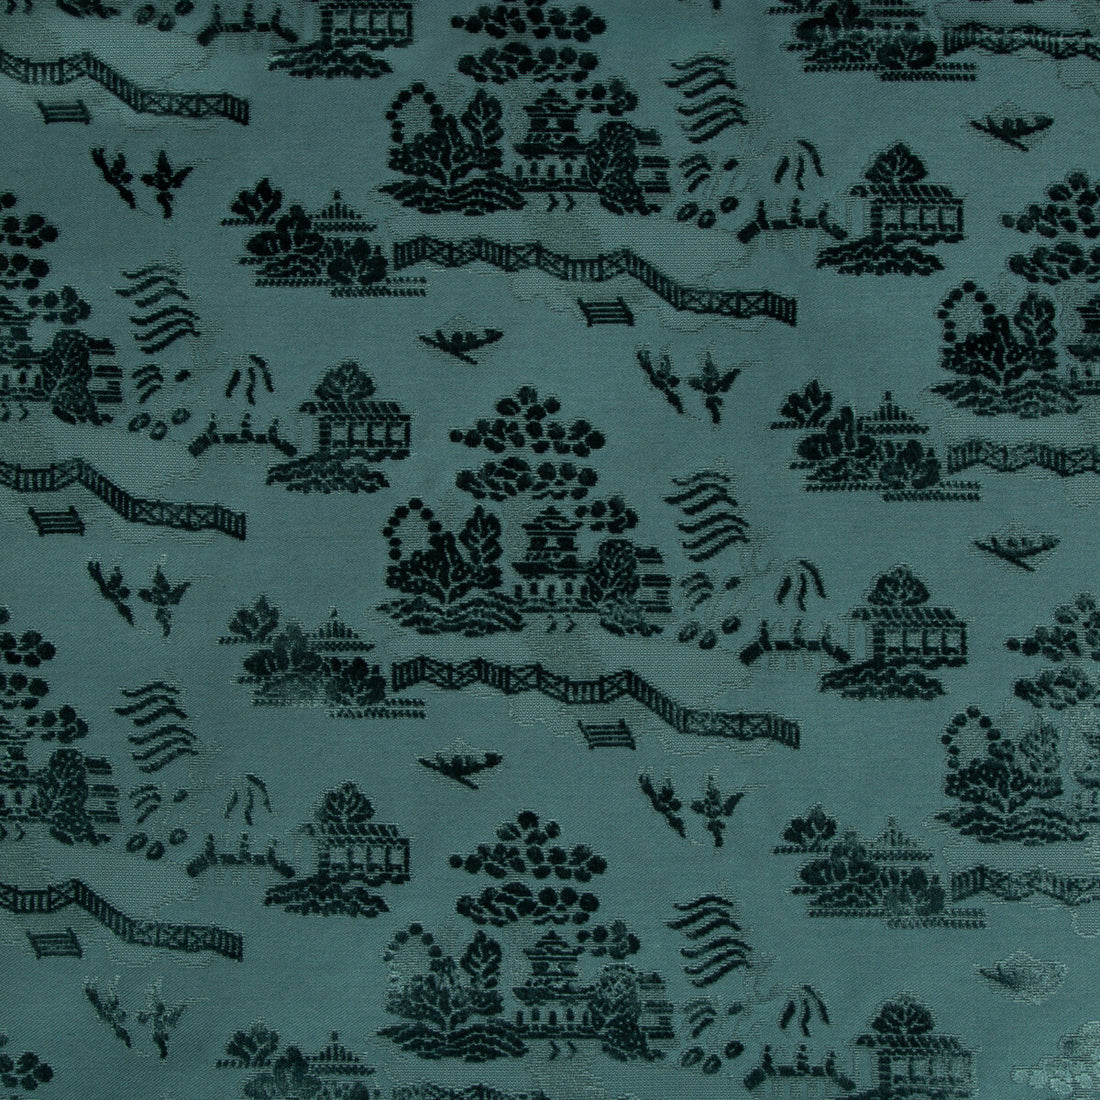 La Pagode Velvet fabric in teal color - pattern 8017129.35.0 - by Brunschwig &amp; Fils in the Les Ensembliers collection